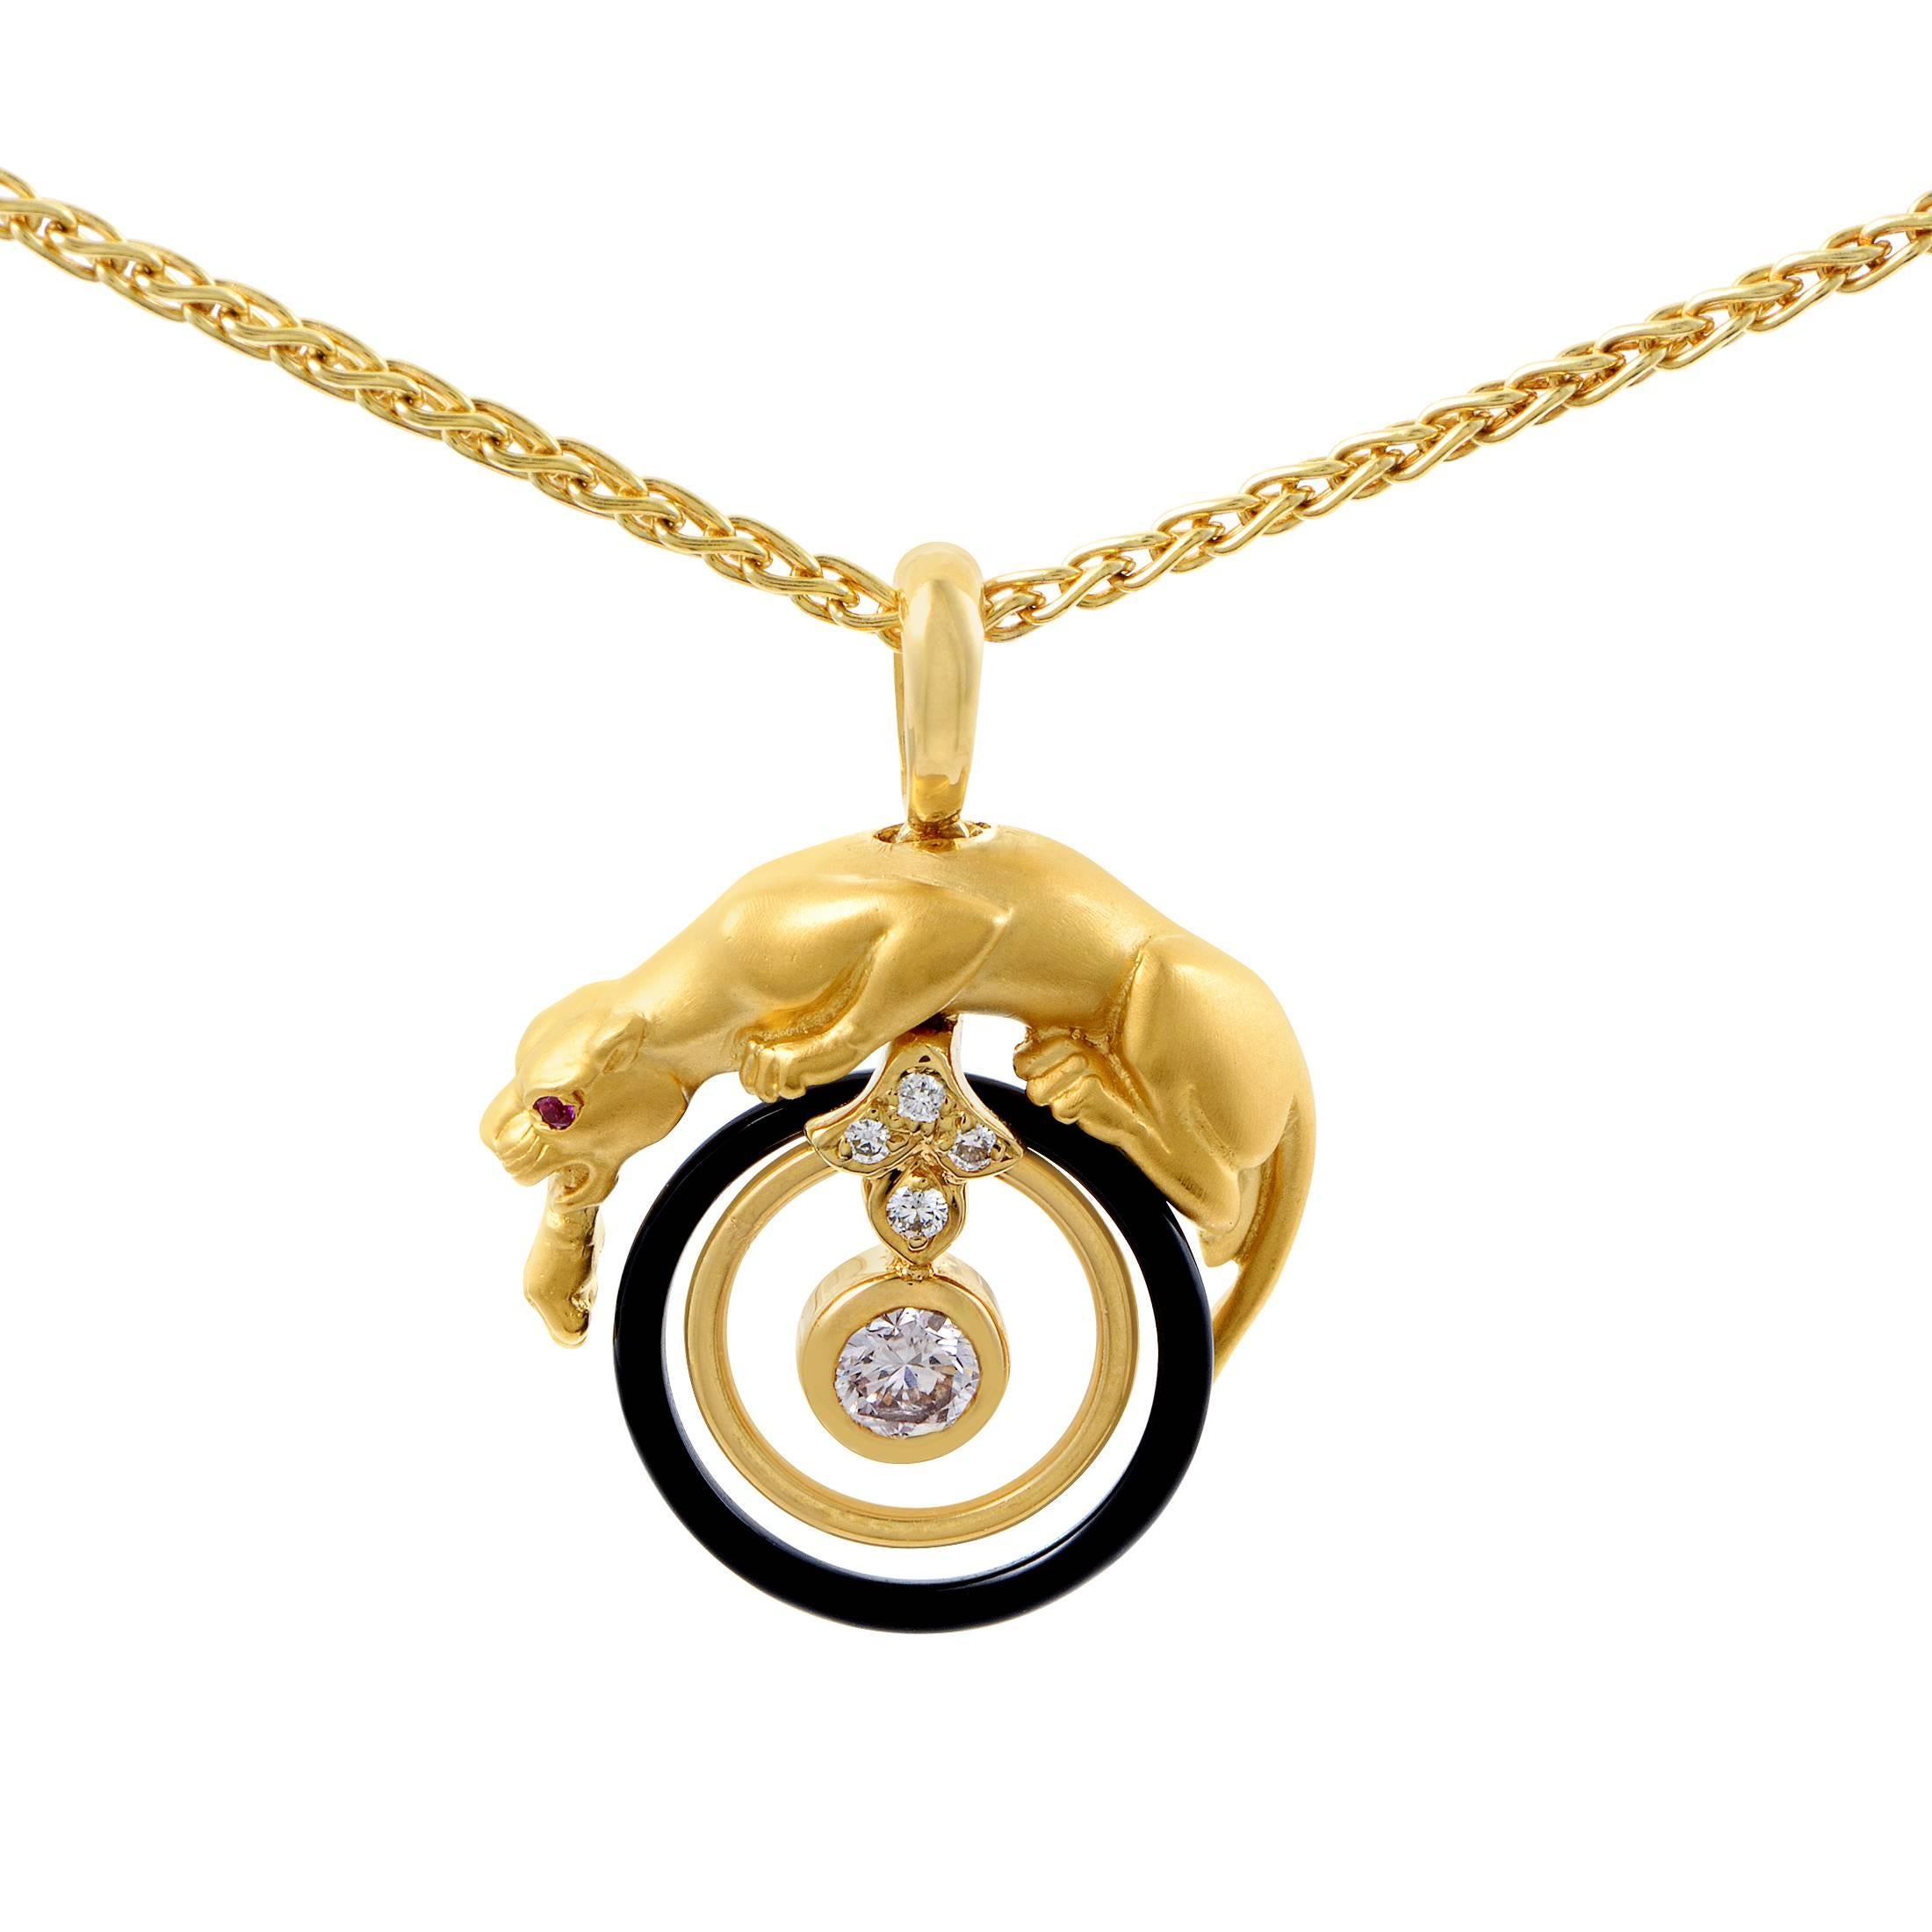 Carrera y Carrera Yellow Gold Diamond and Gemstone Panther Pendant Necklace